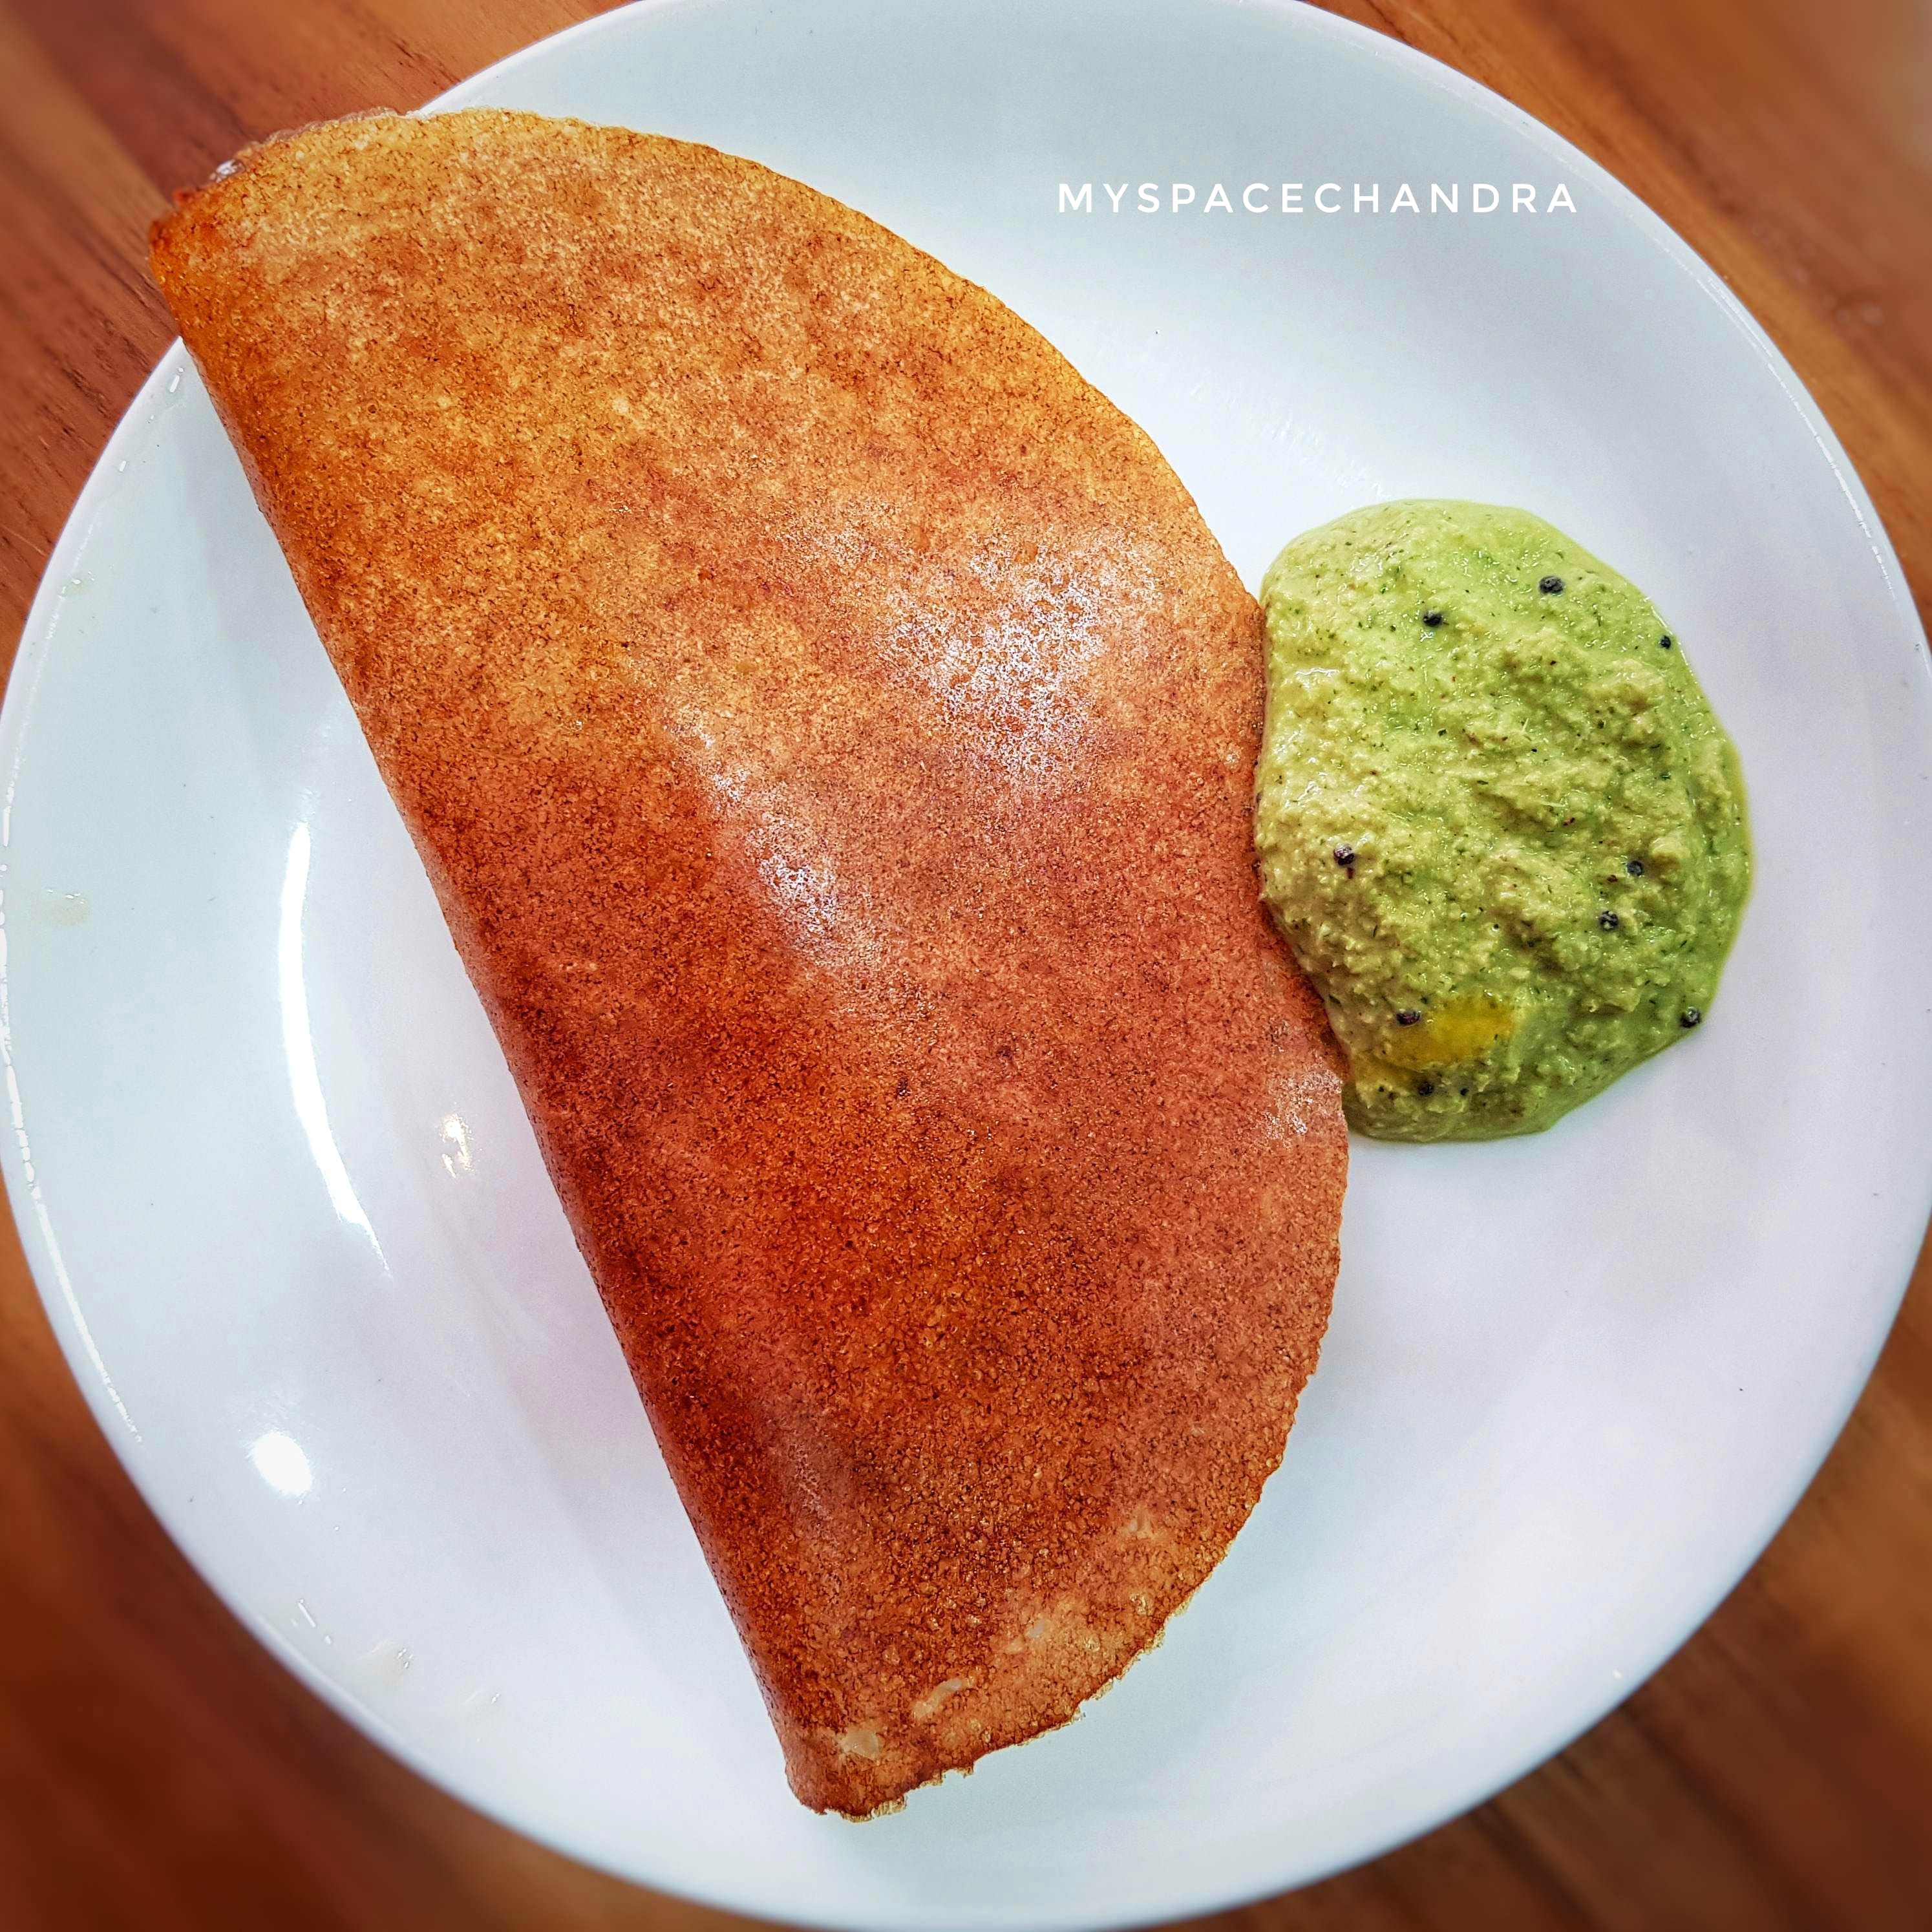 Dish,Food,Cuisine,Dosa,Ingredient,Baked goods,Produce,Indian cuisine,Fried food,Ciabatta